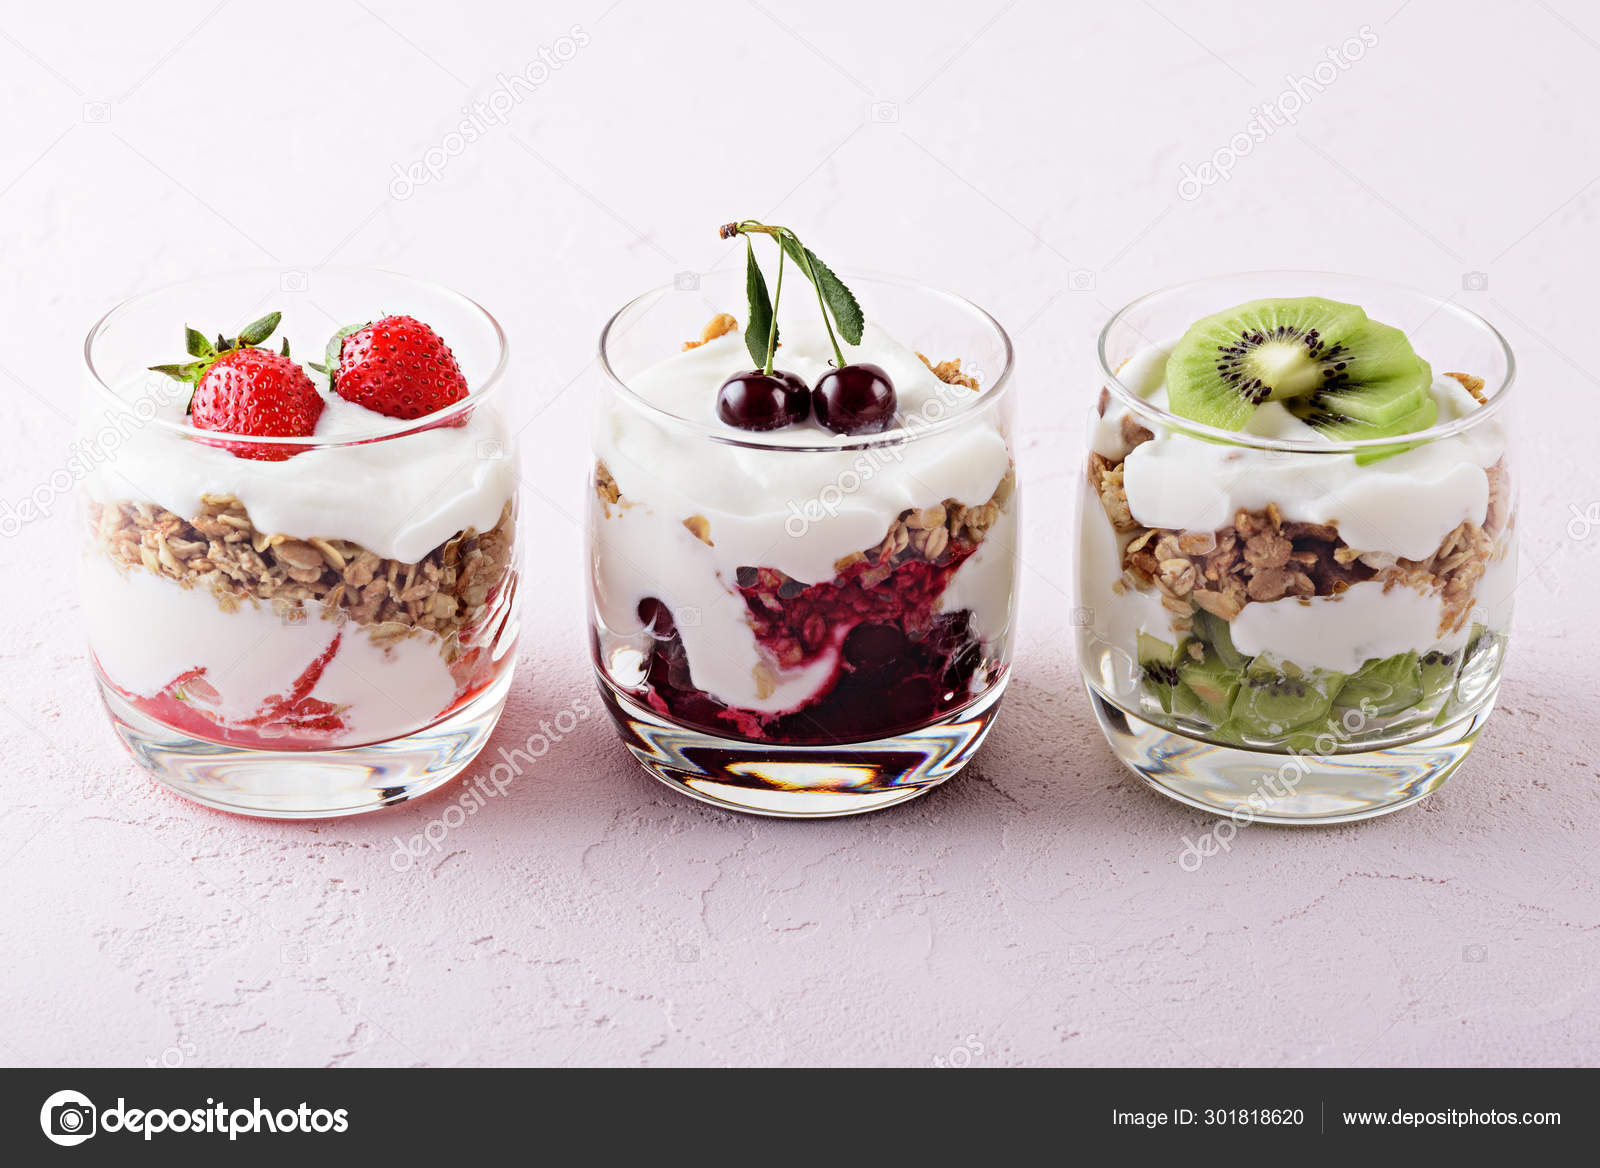 Vegetarian Desserts With Cottage Cheese Granola Strawberry